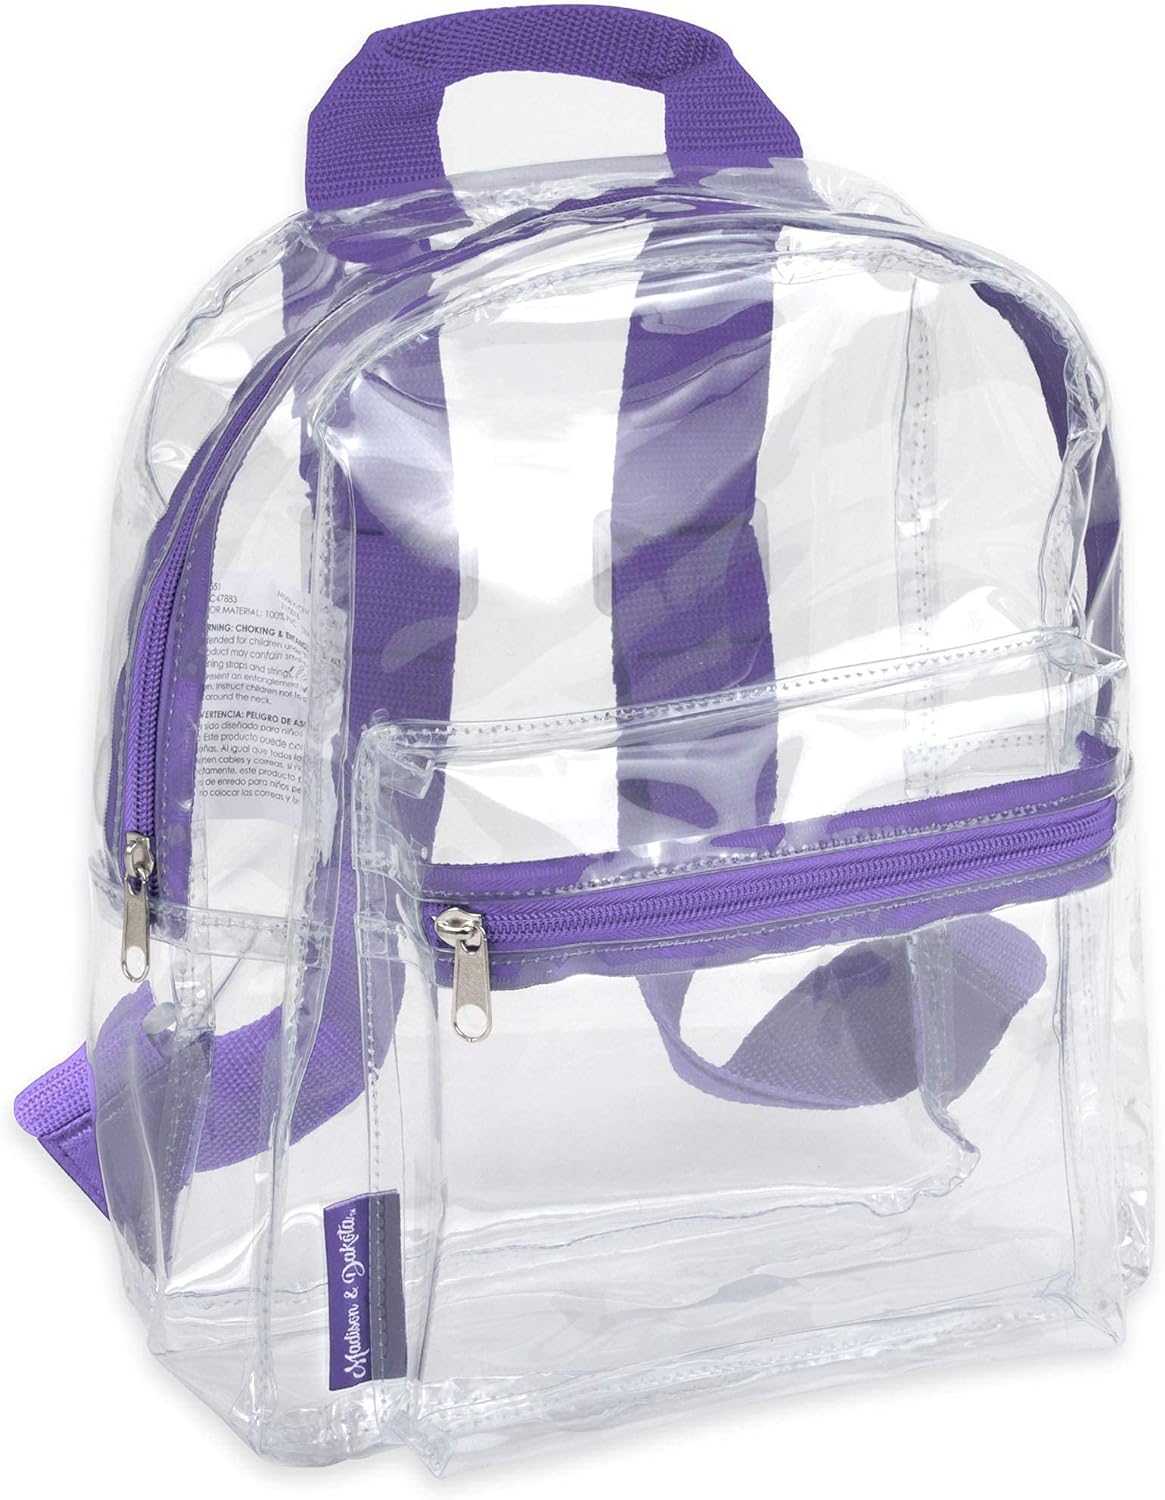 MADISON  DAKOTA Clear Mini Backpacks for Beach, Travel - Stadium Approved Bag with Adjustable Straps